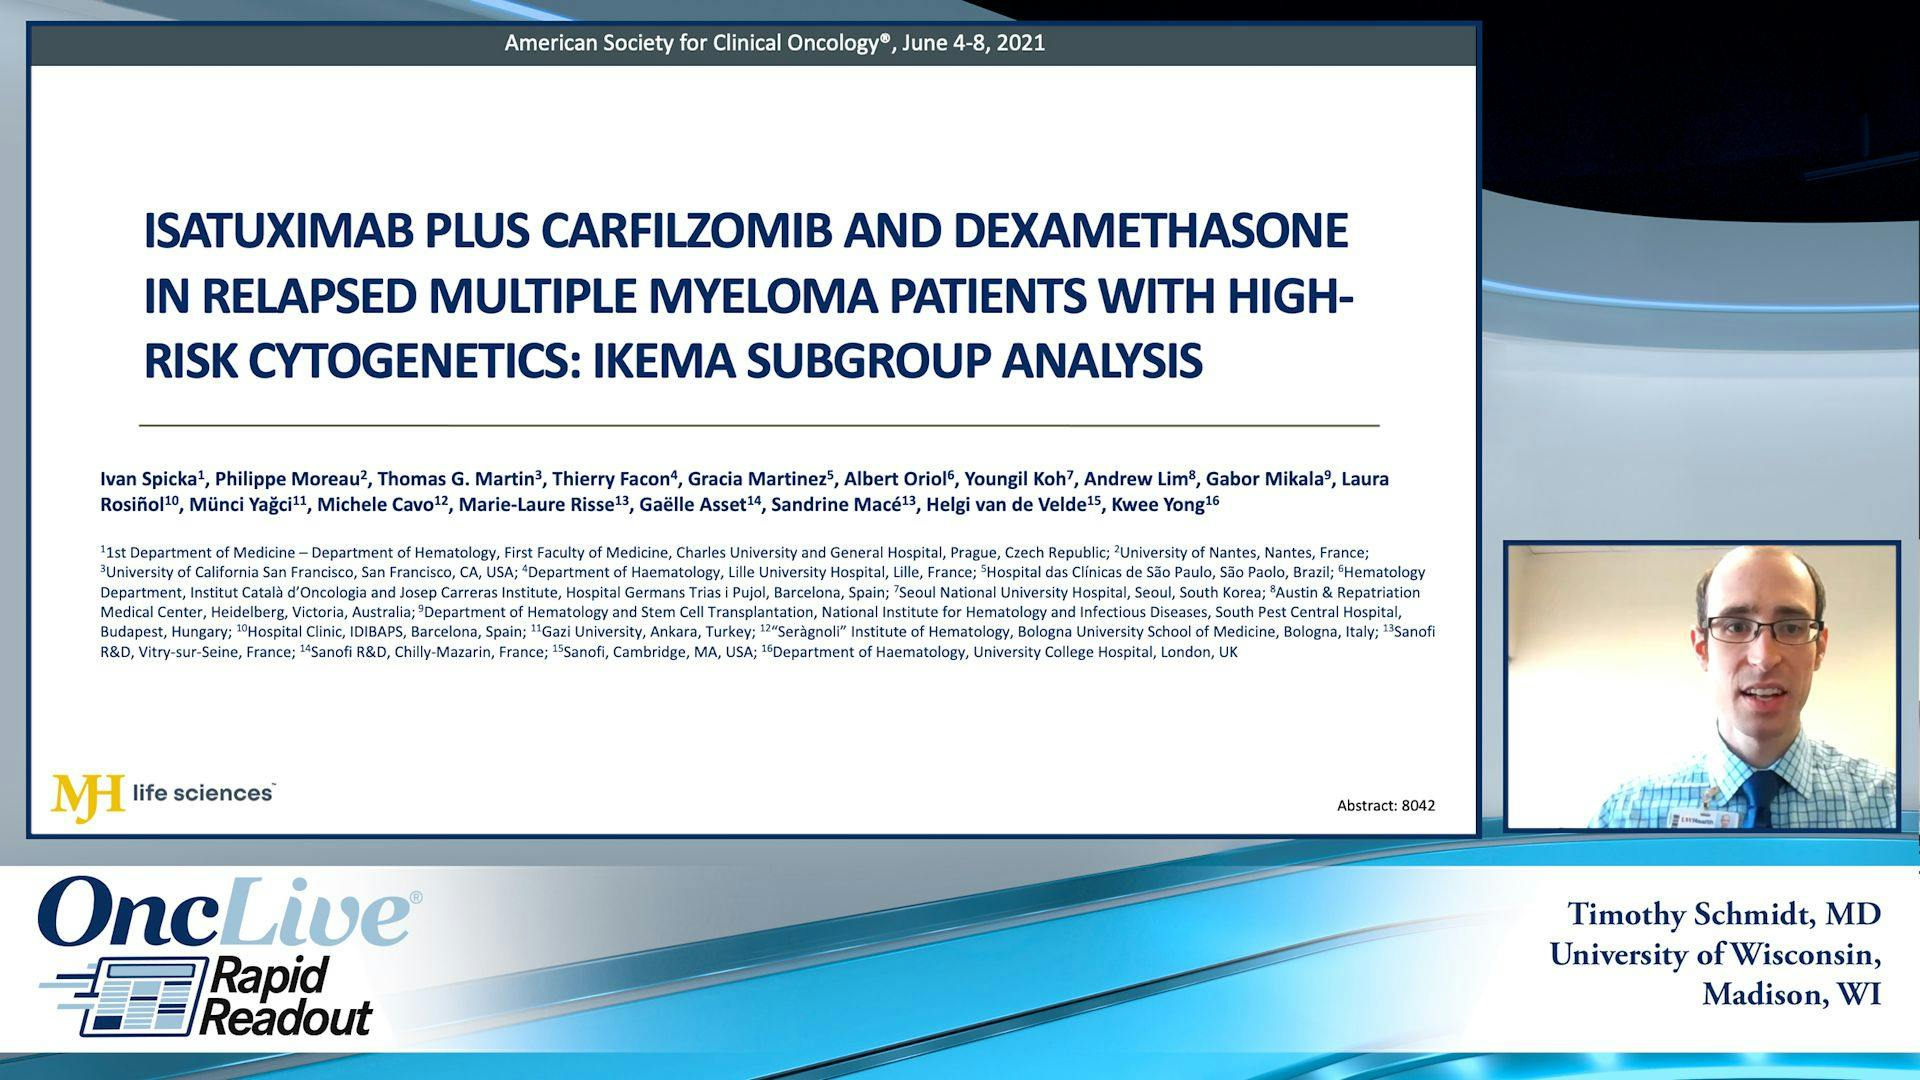 Rapid Readouts: IKEMA Subgroup Analysis in Relapsed Multiple Myeloma Patients With High-Risk Cytogenetics